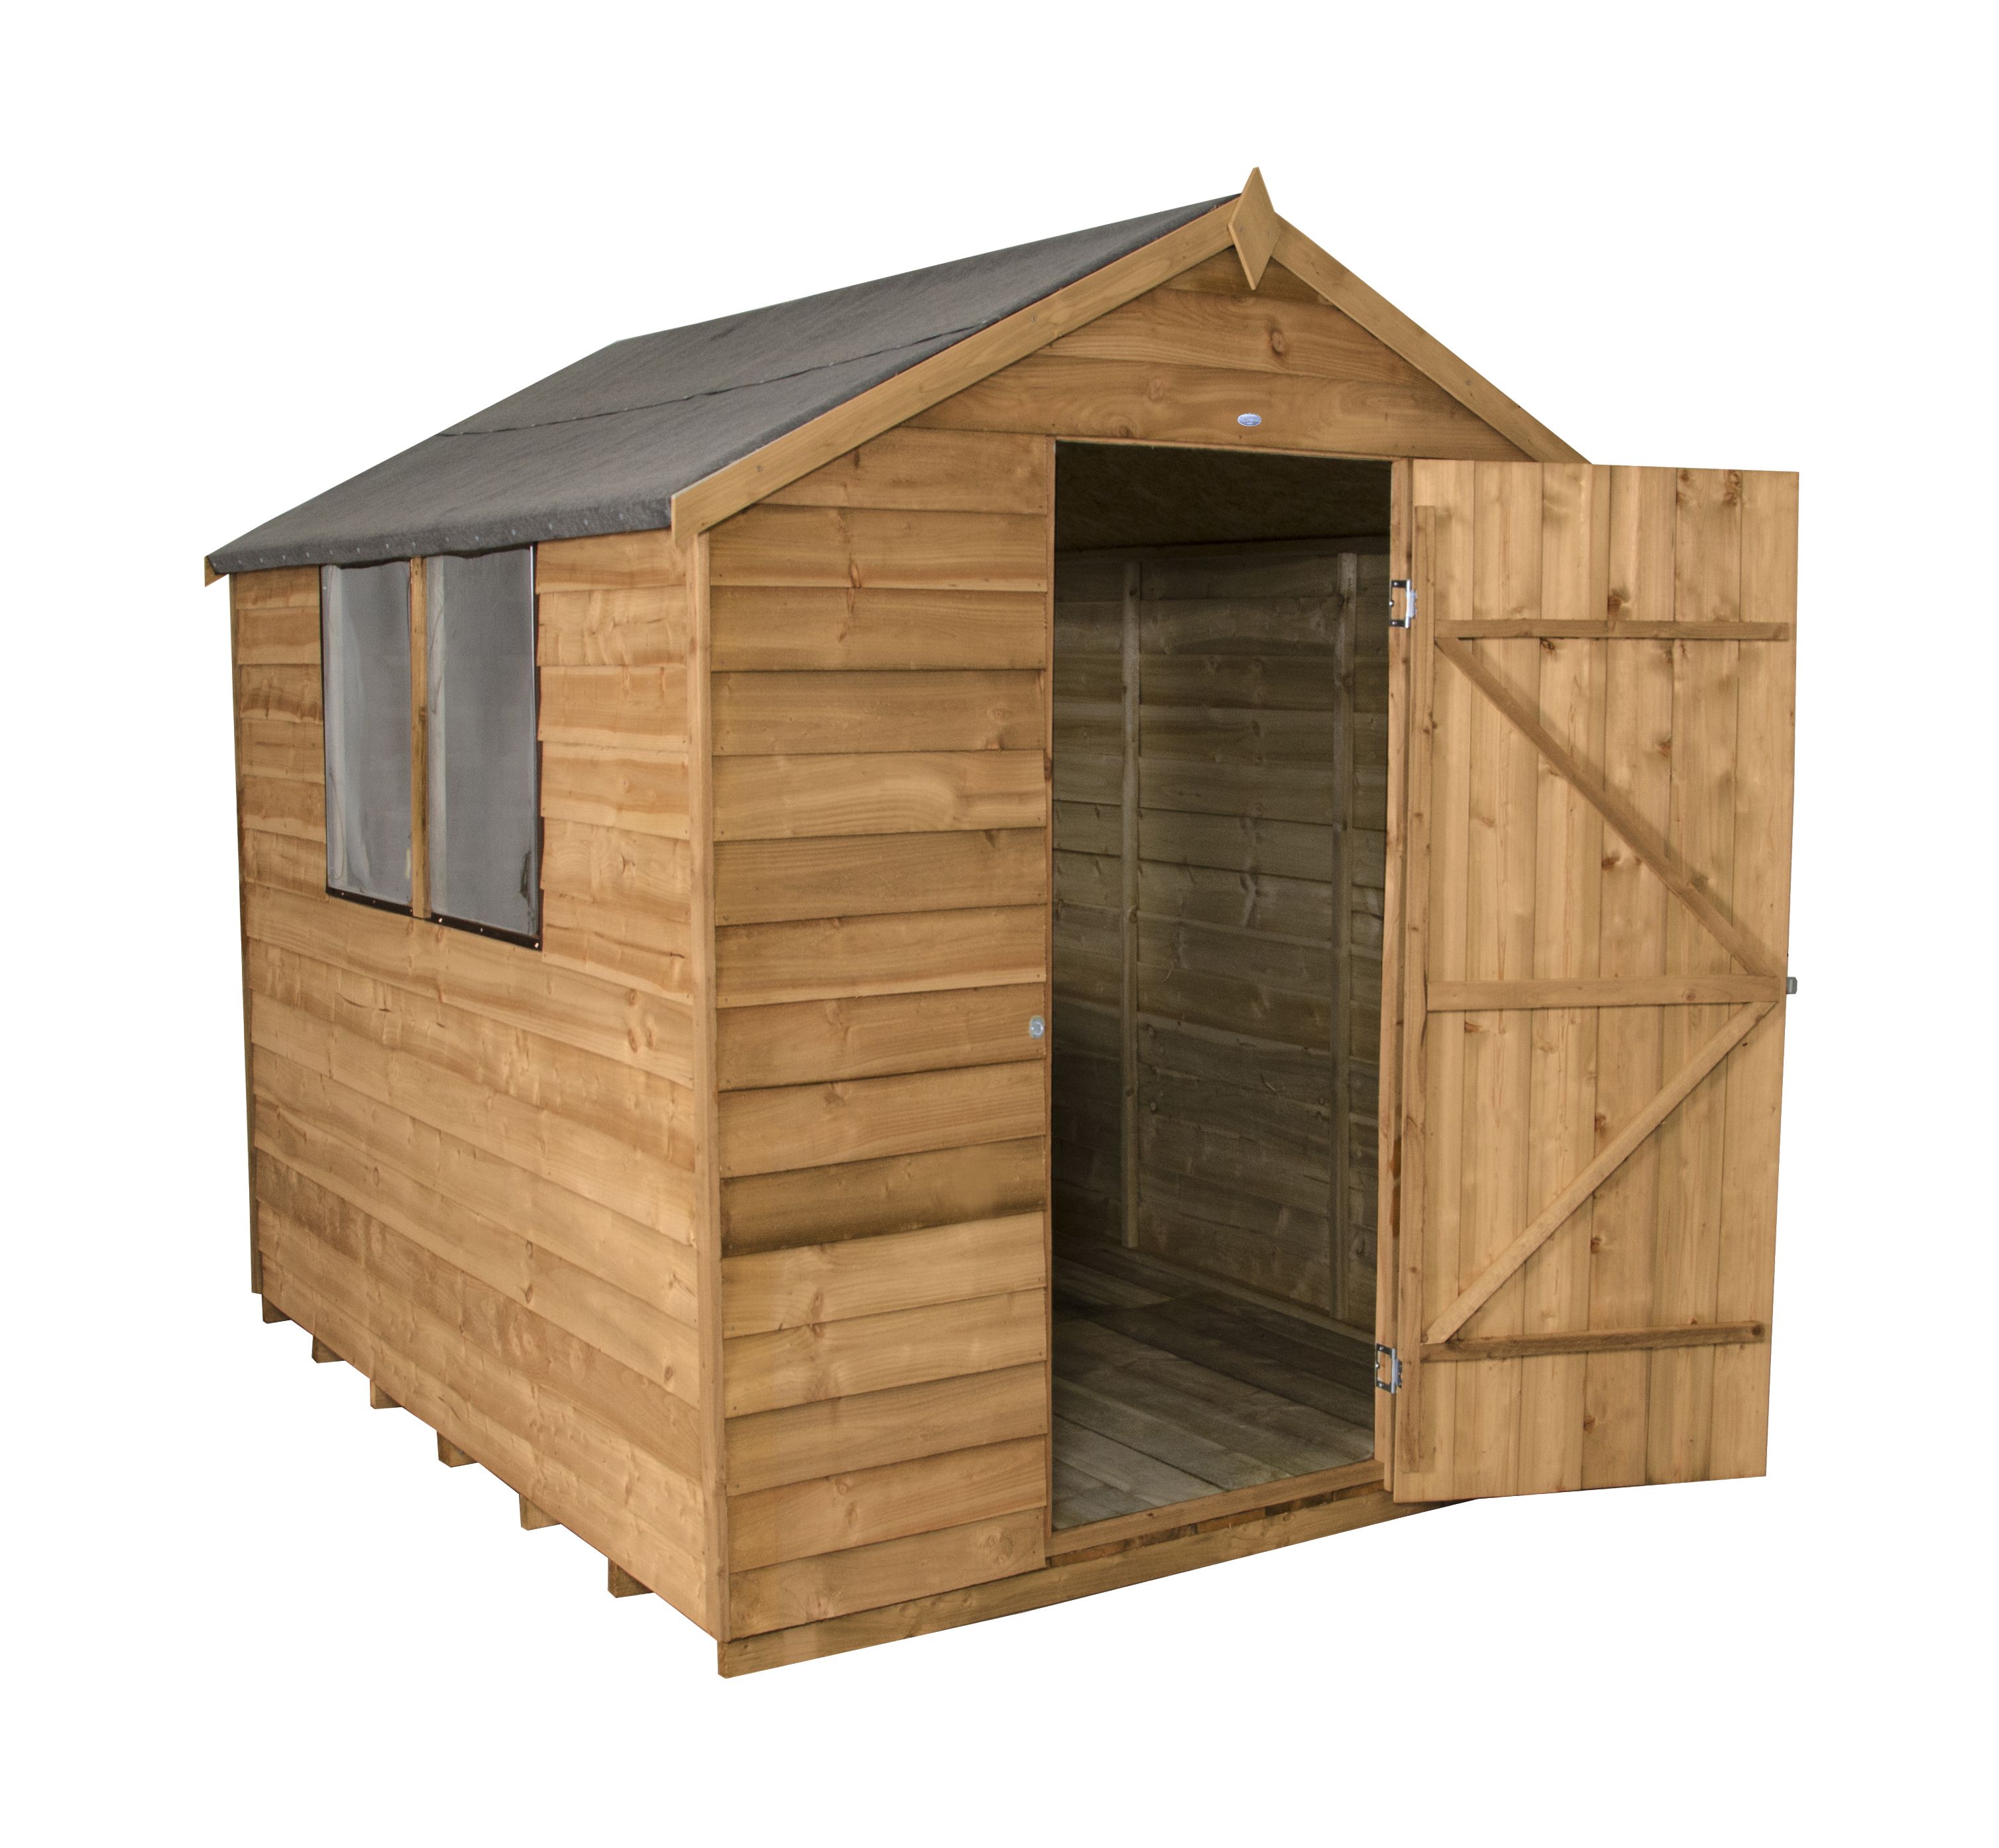 Forest Garden 8x6 Apex Overlap Wooden Shed